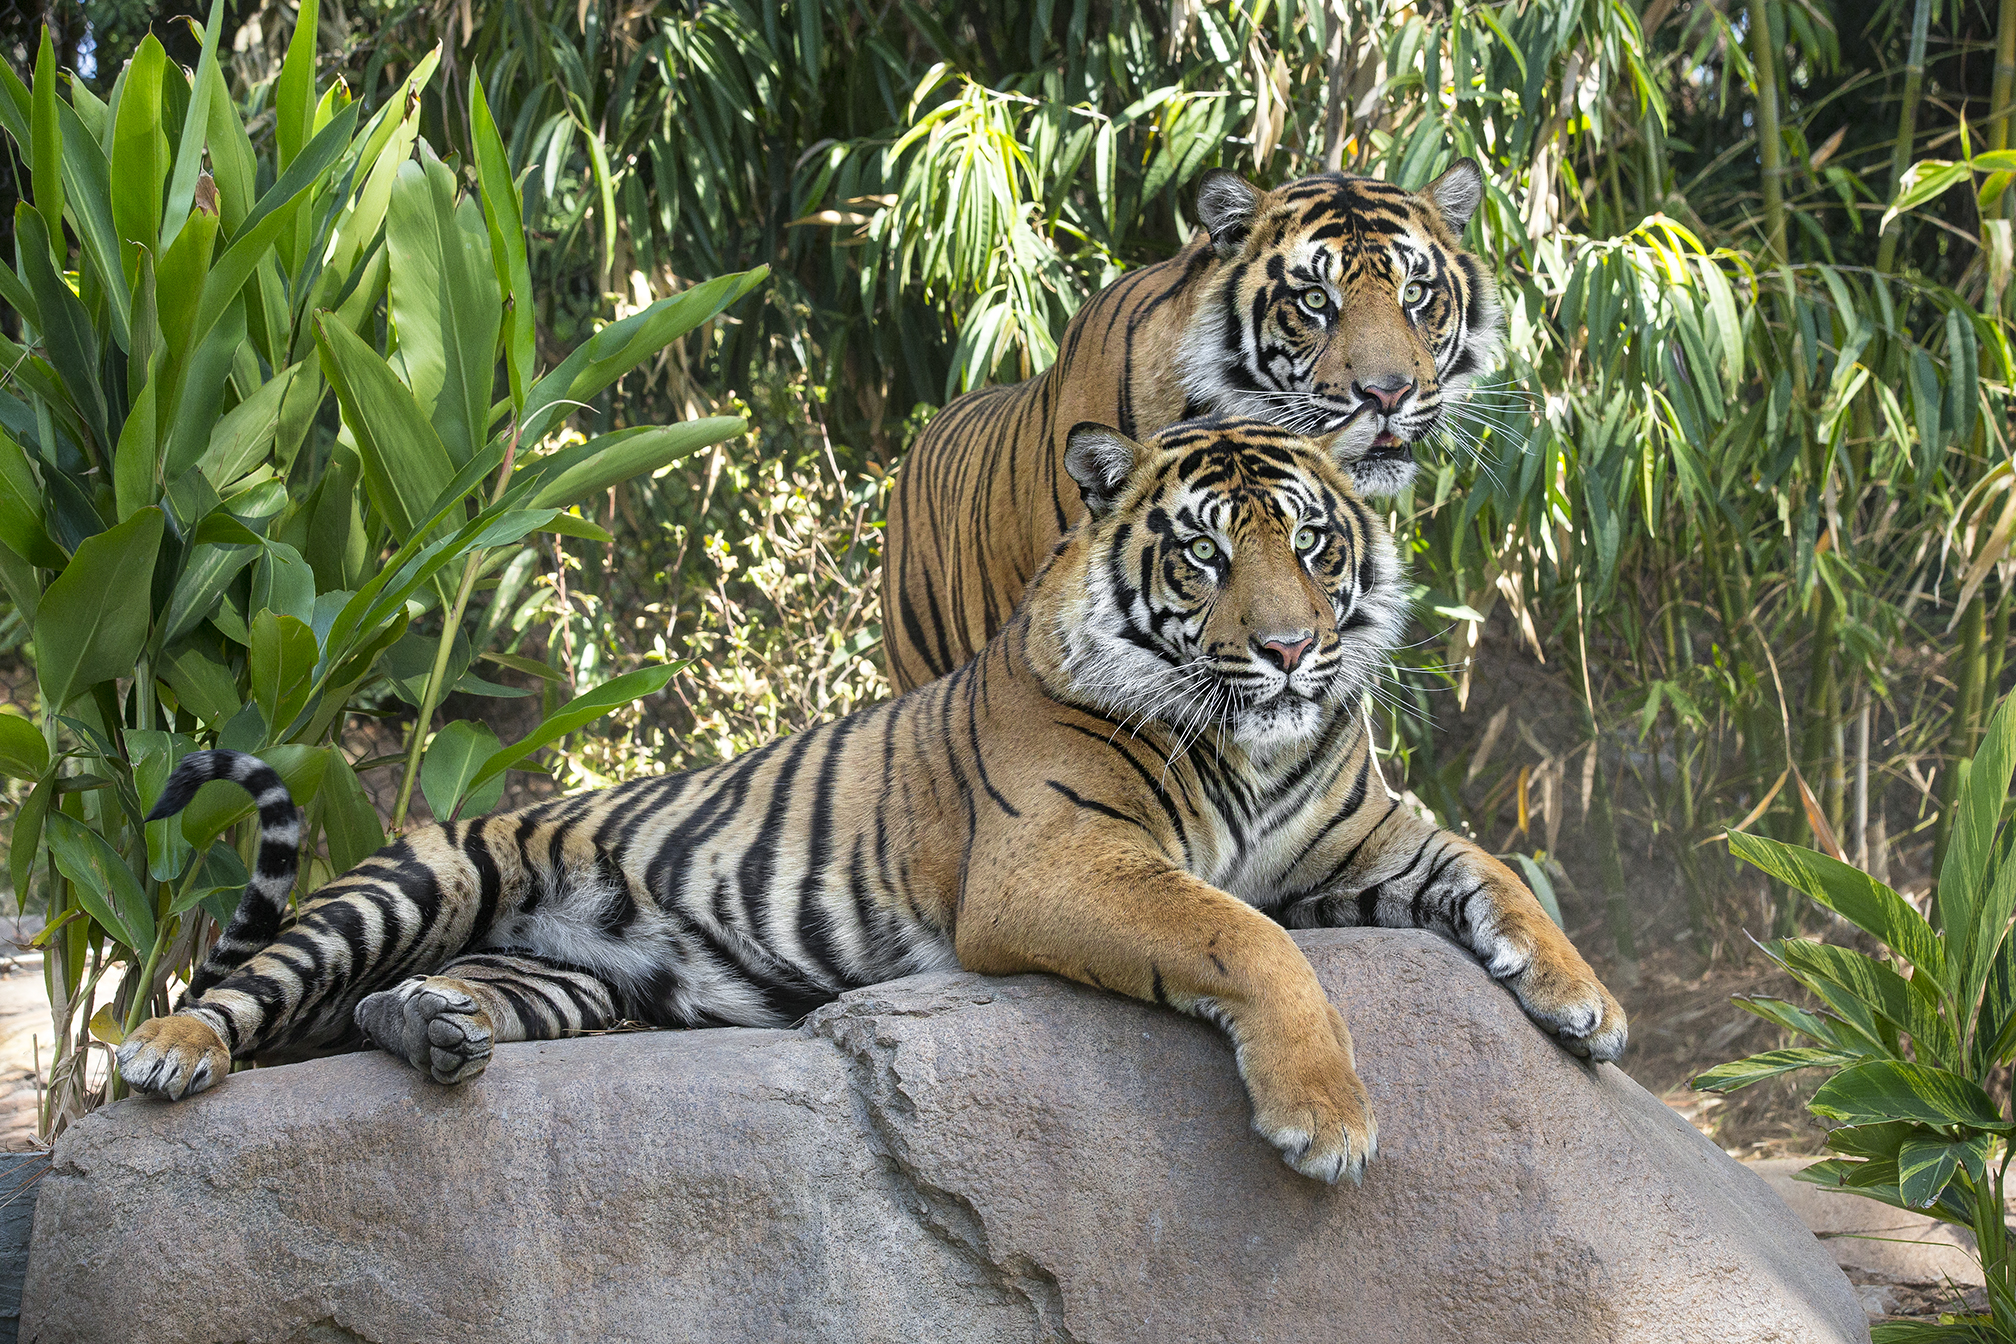 Thomas and Conrad, Sumatran tiger brothers, were among the first residents of Tiger Trail and wowed visitors with their gorgeous good looks and playful personalities. They were young enough to get along and share a territory, as were sisters Joanne and Majel. Adult female Delta and adult male Teddy had their own spaces and alone time to prowl and lay in the sun.